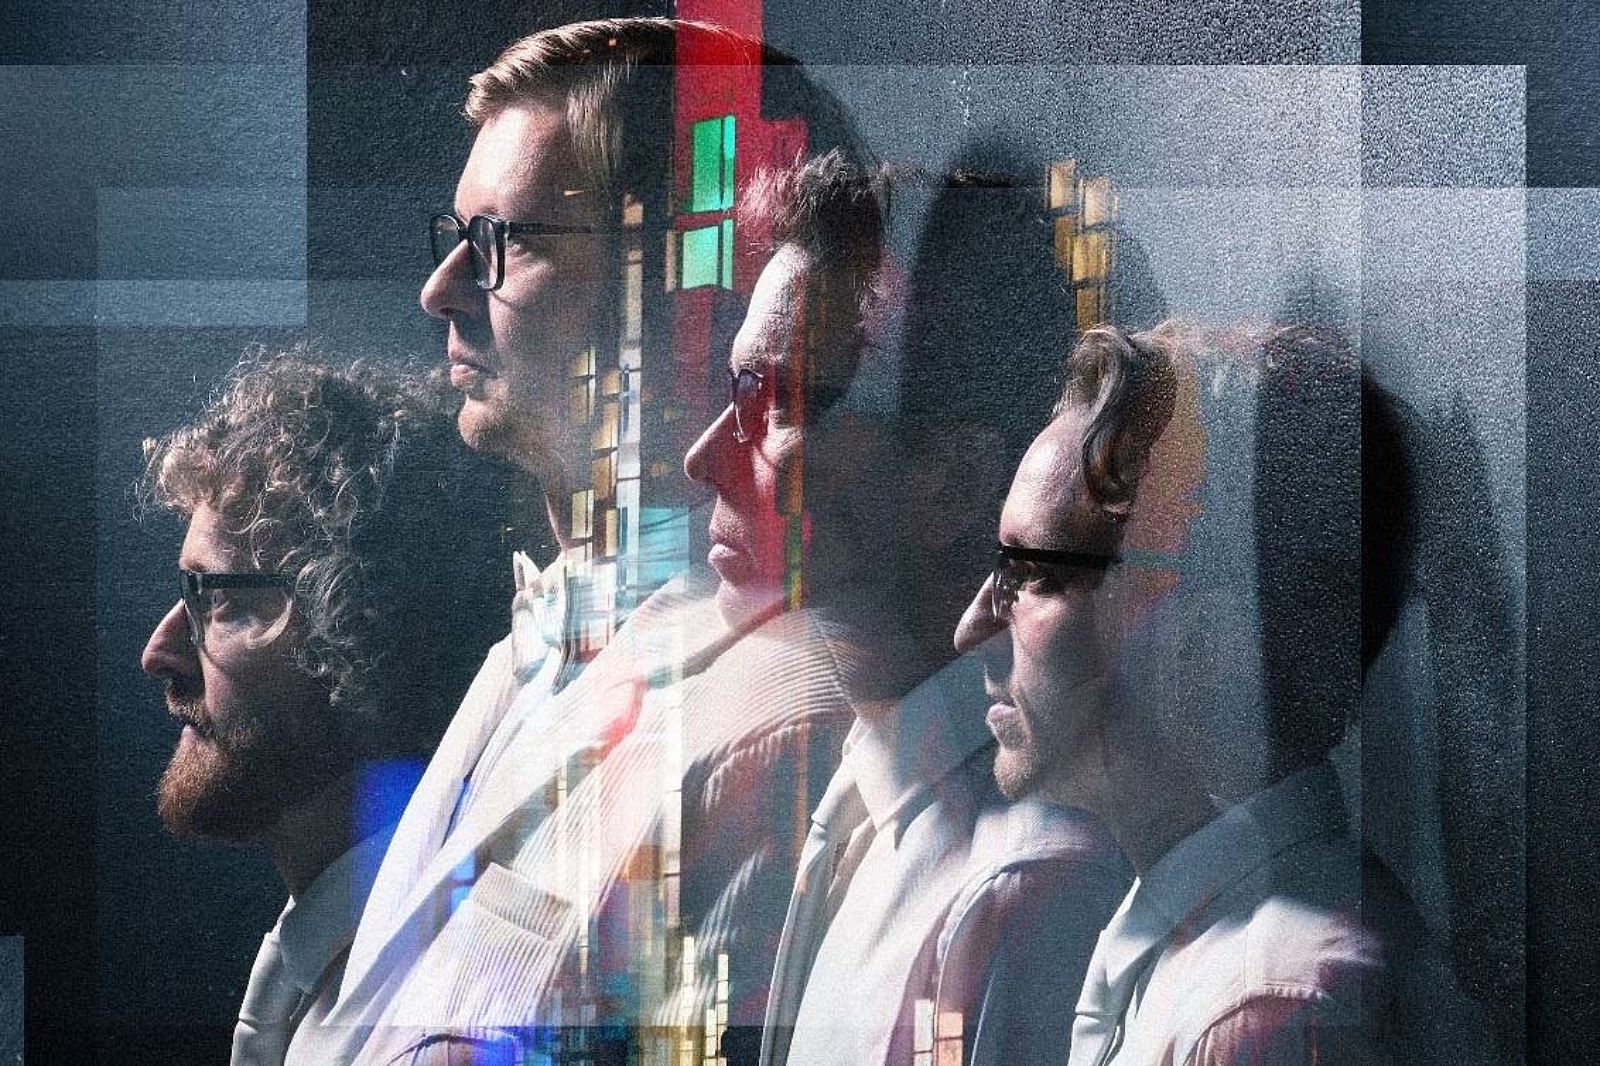 Win a pair of tickets to see Public Service Broadcasting play at Peckham Audio